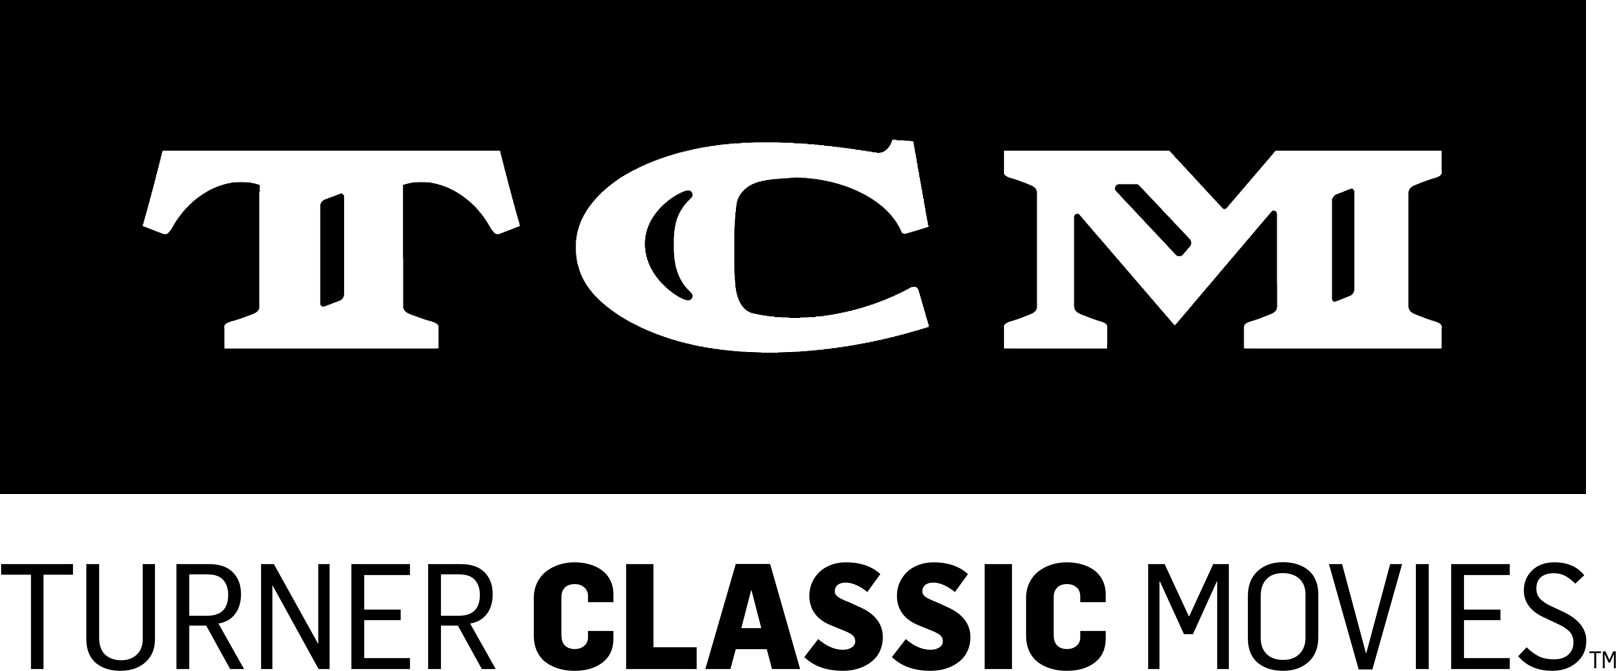 Image   Turner Classic Movies Logo (2013; Print) With The Tm Symbol.png | Logopedia | Fandom Powered By Wikia - Turner, Transparent background PNG HD thumbnail